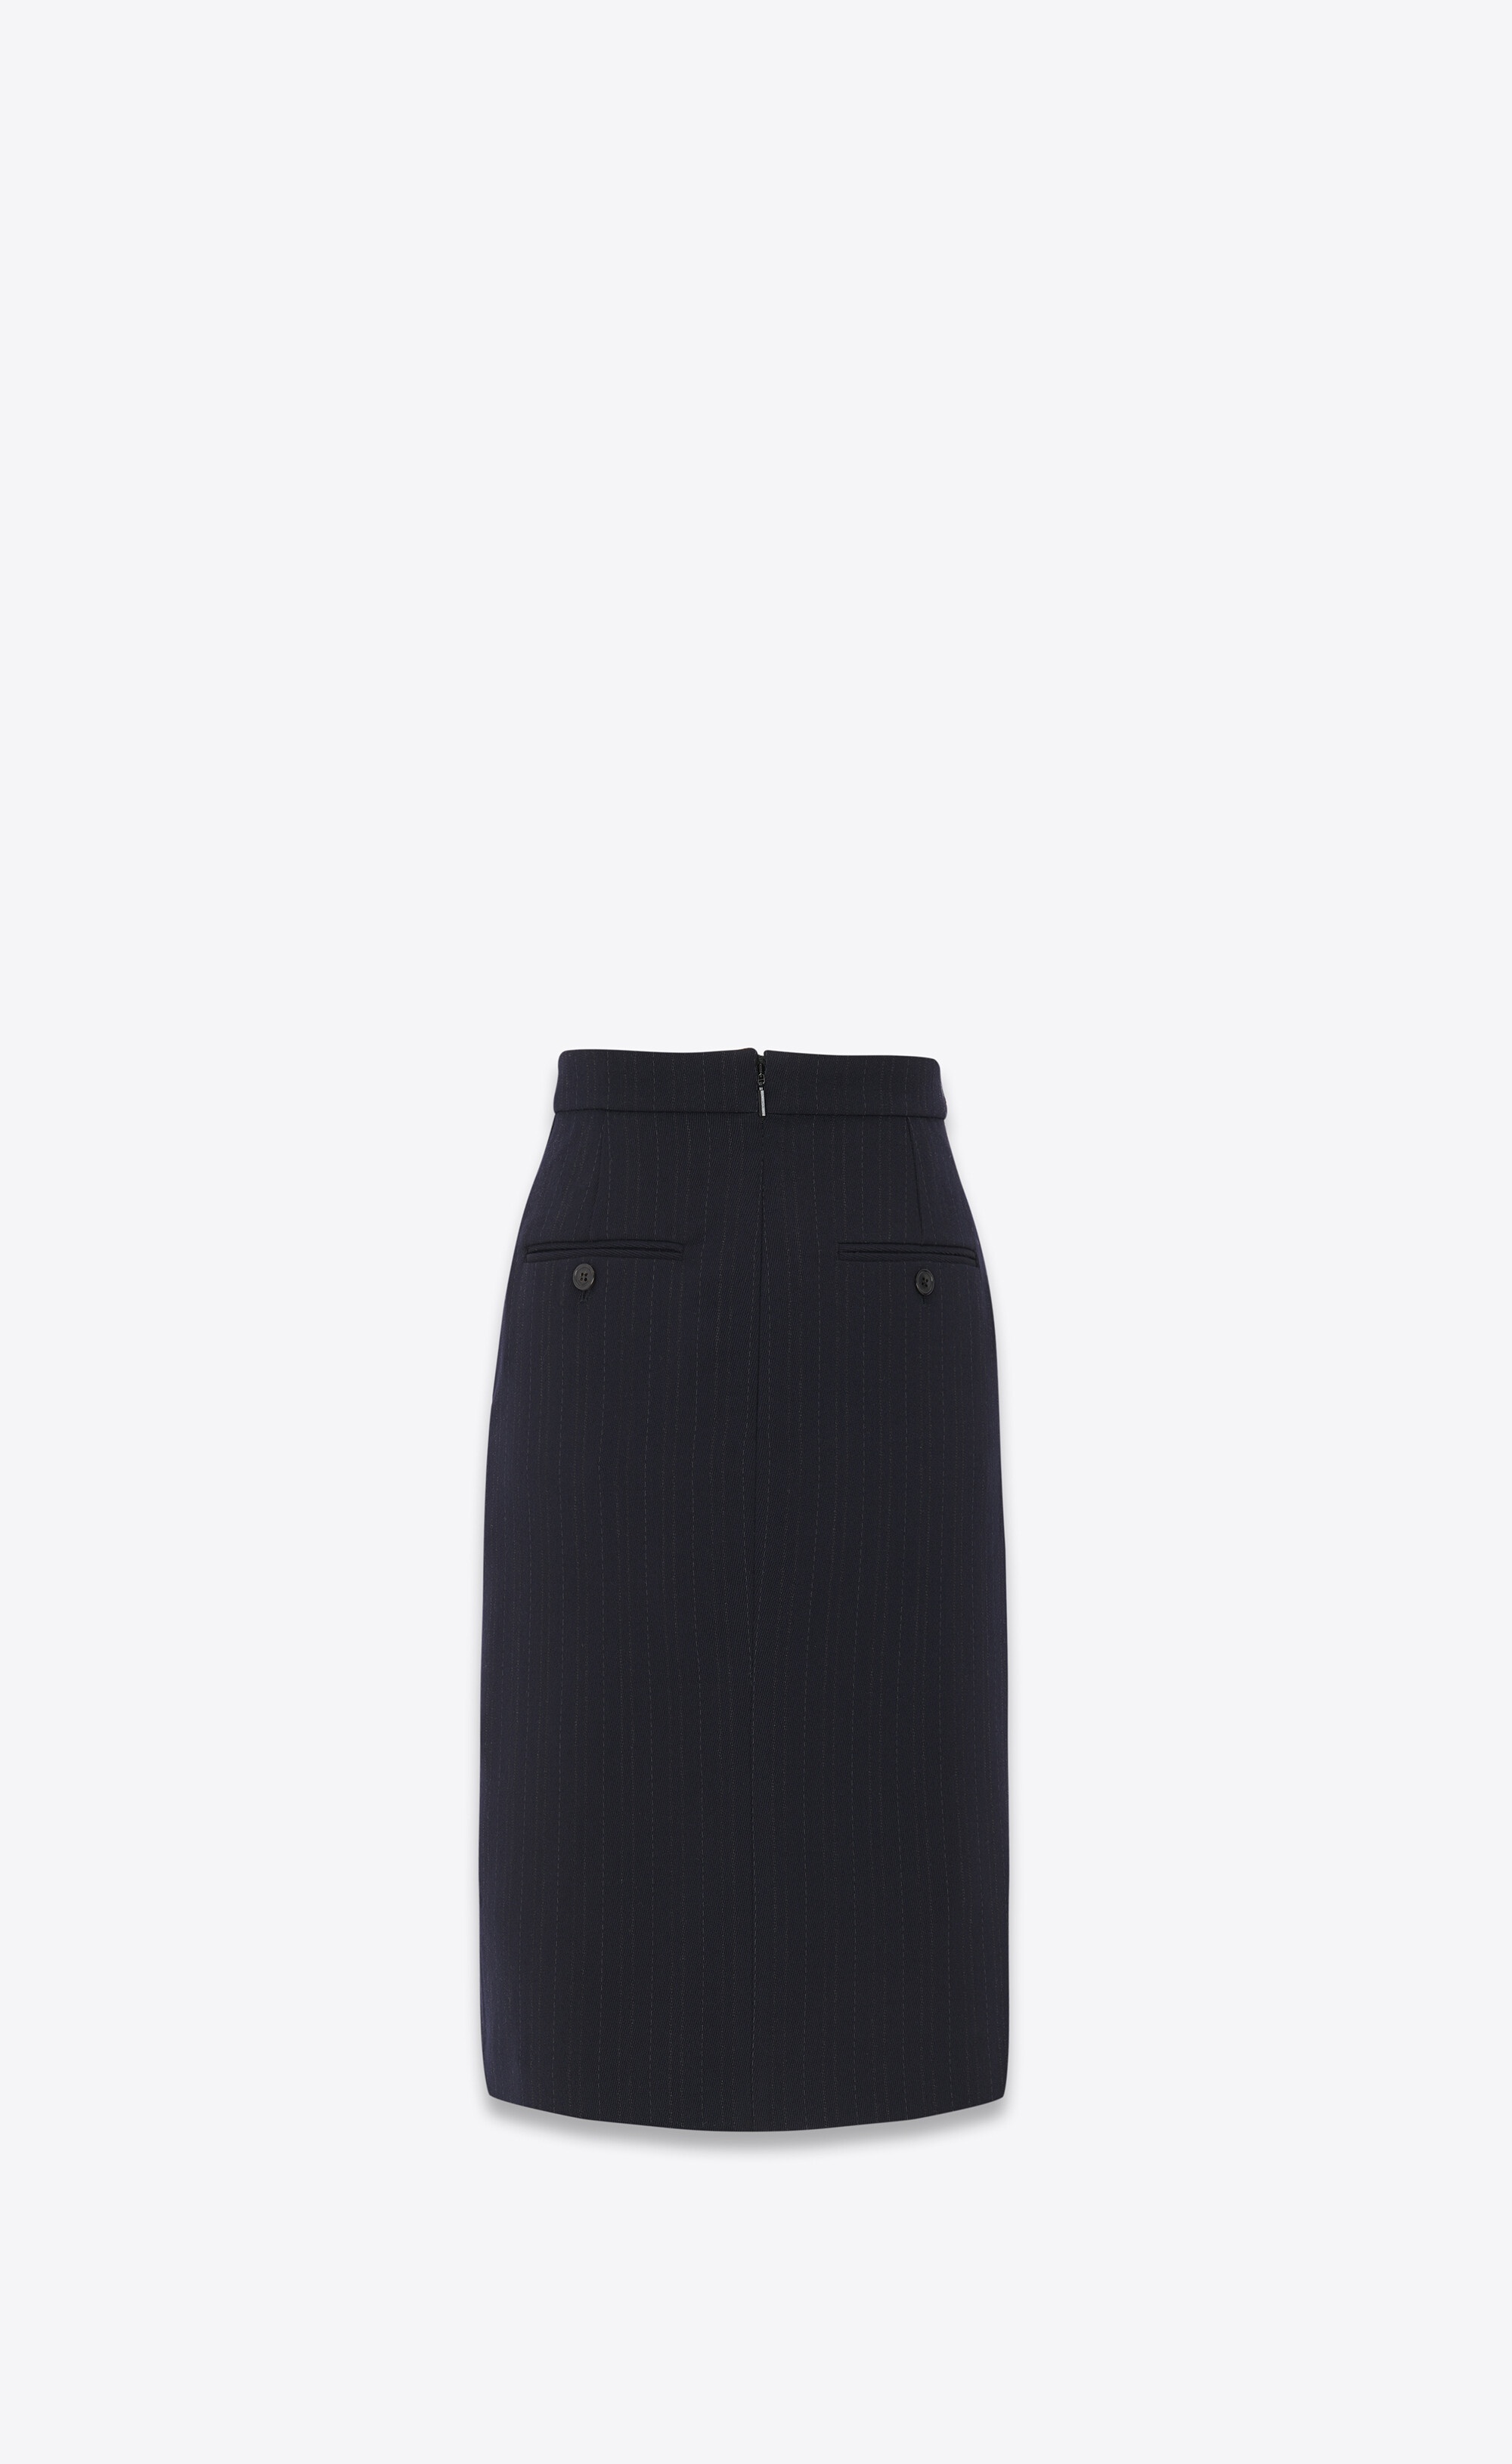 pencil skirt in striped wool - 3